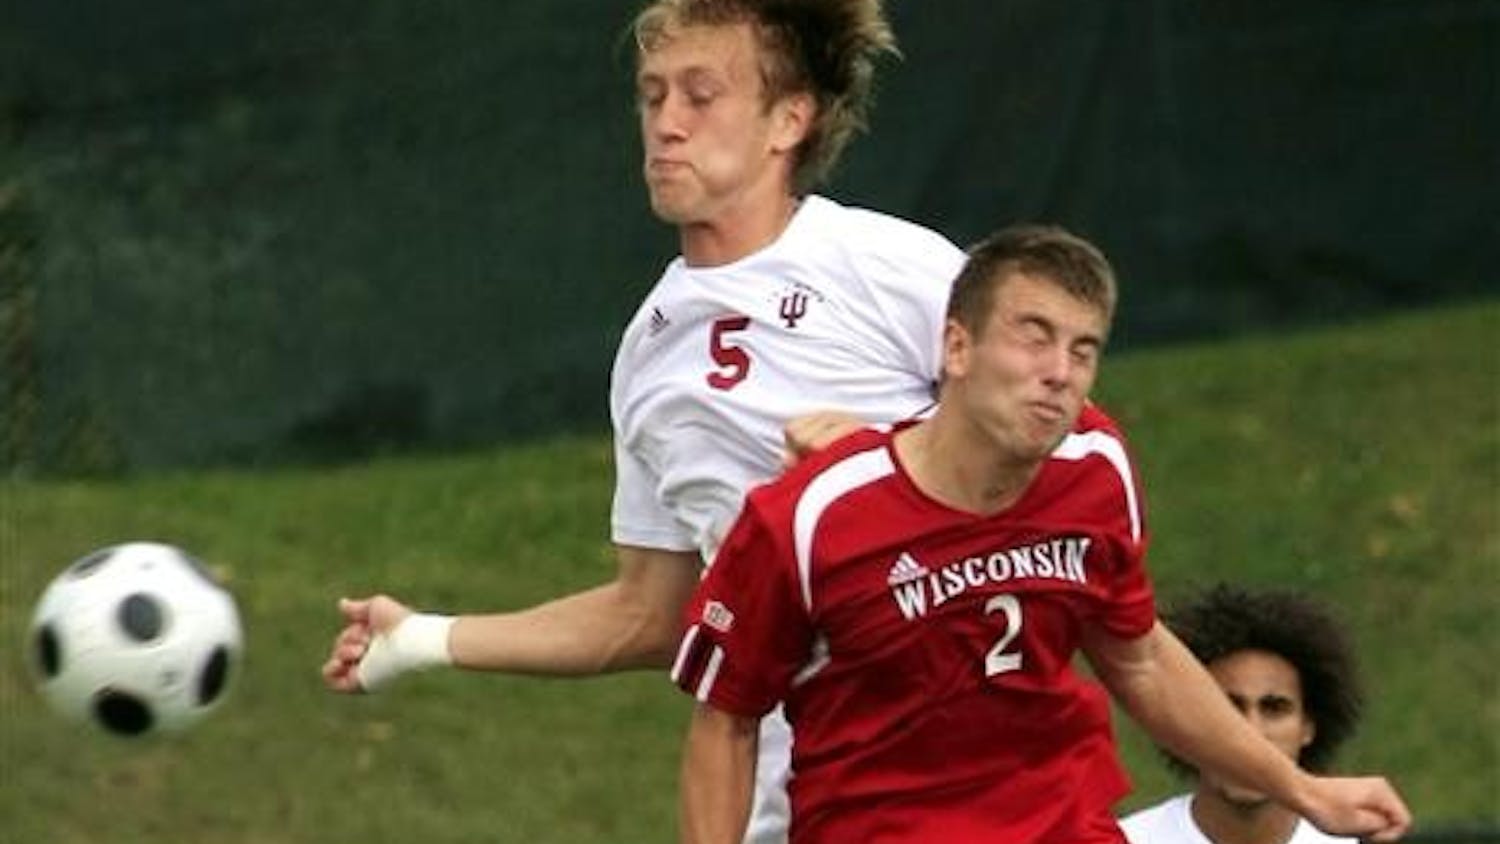 IU midfielder Brad Ring battles with Wisconsin's Brandon Miller during a game on Sept. 21 at Bill Armstrong Stadium.